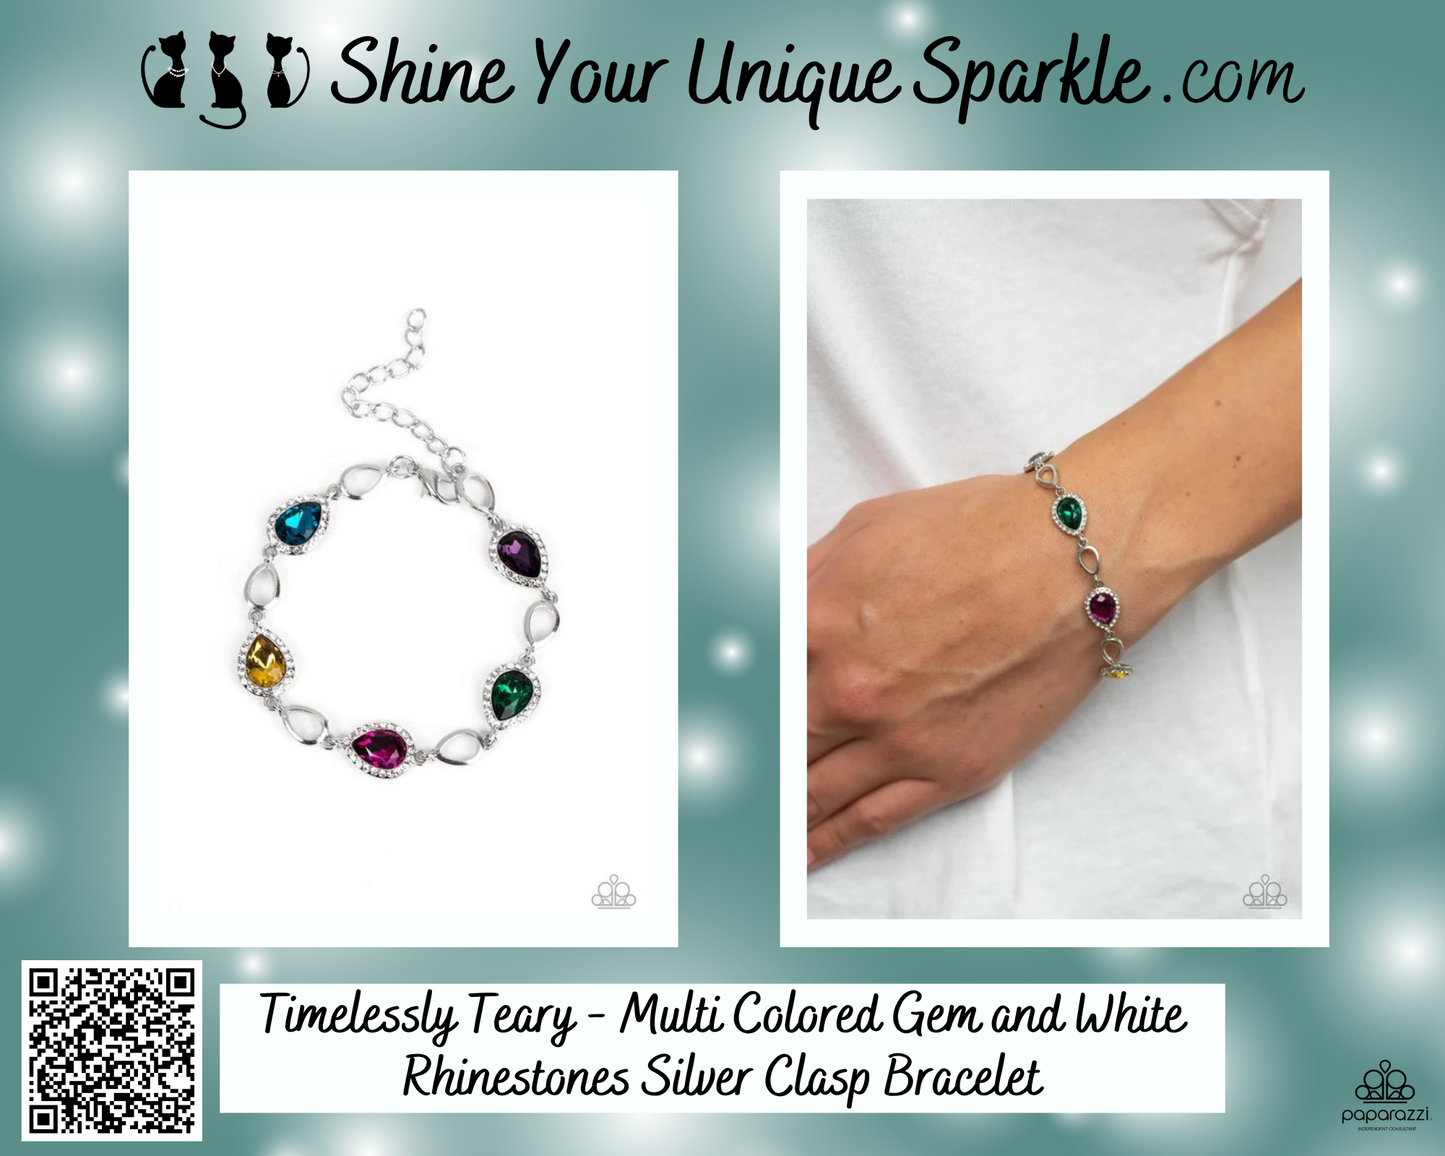 Timelessly Teary - Multi Colored Gem and White Rhinestones Silver Clasp Bracelet